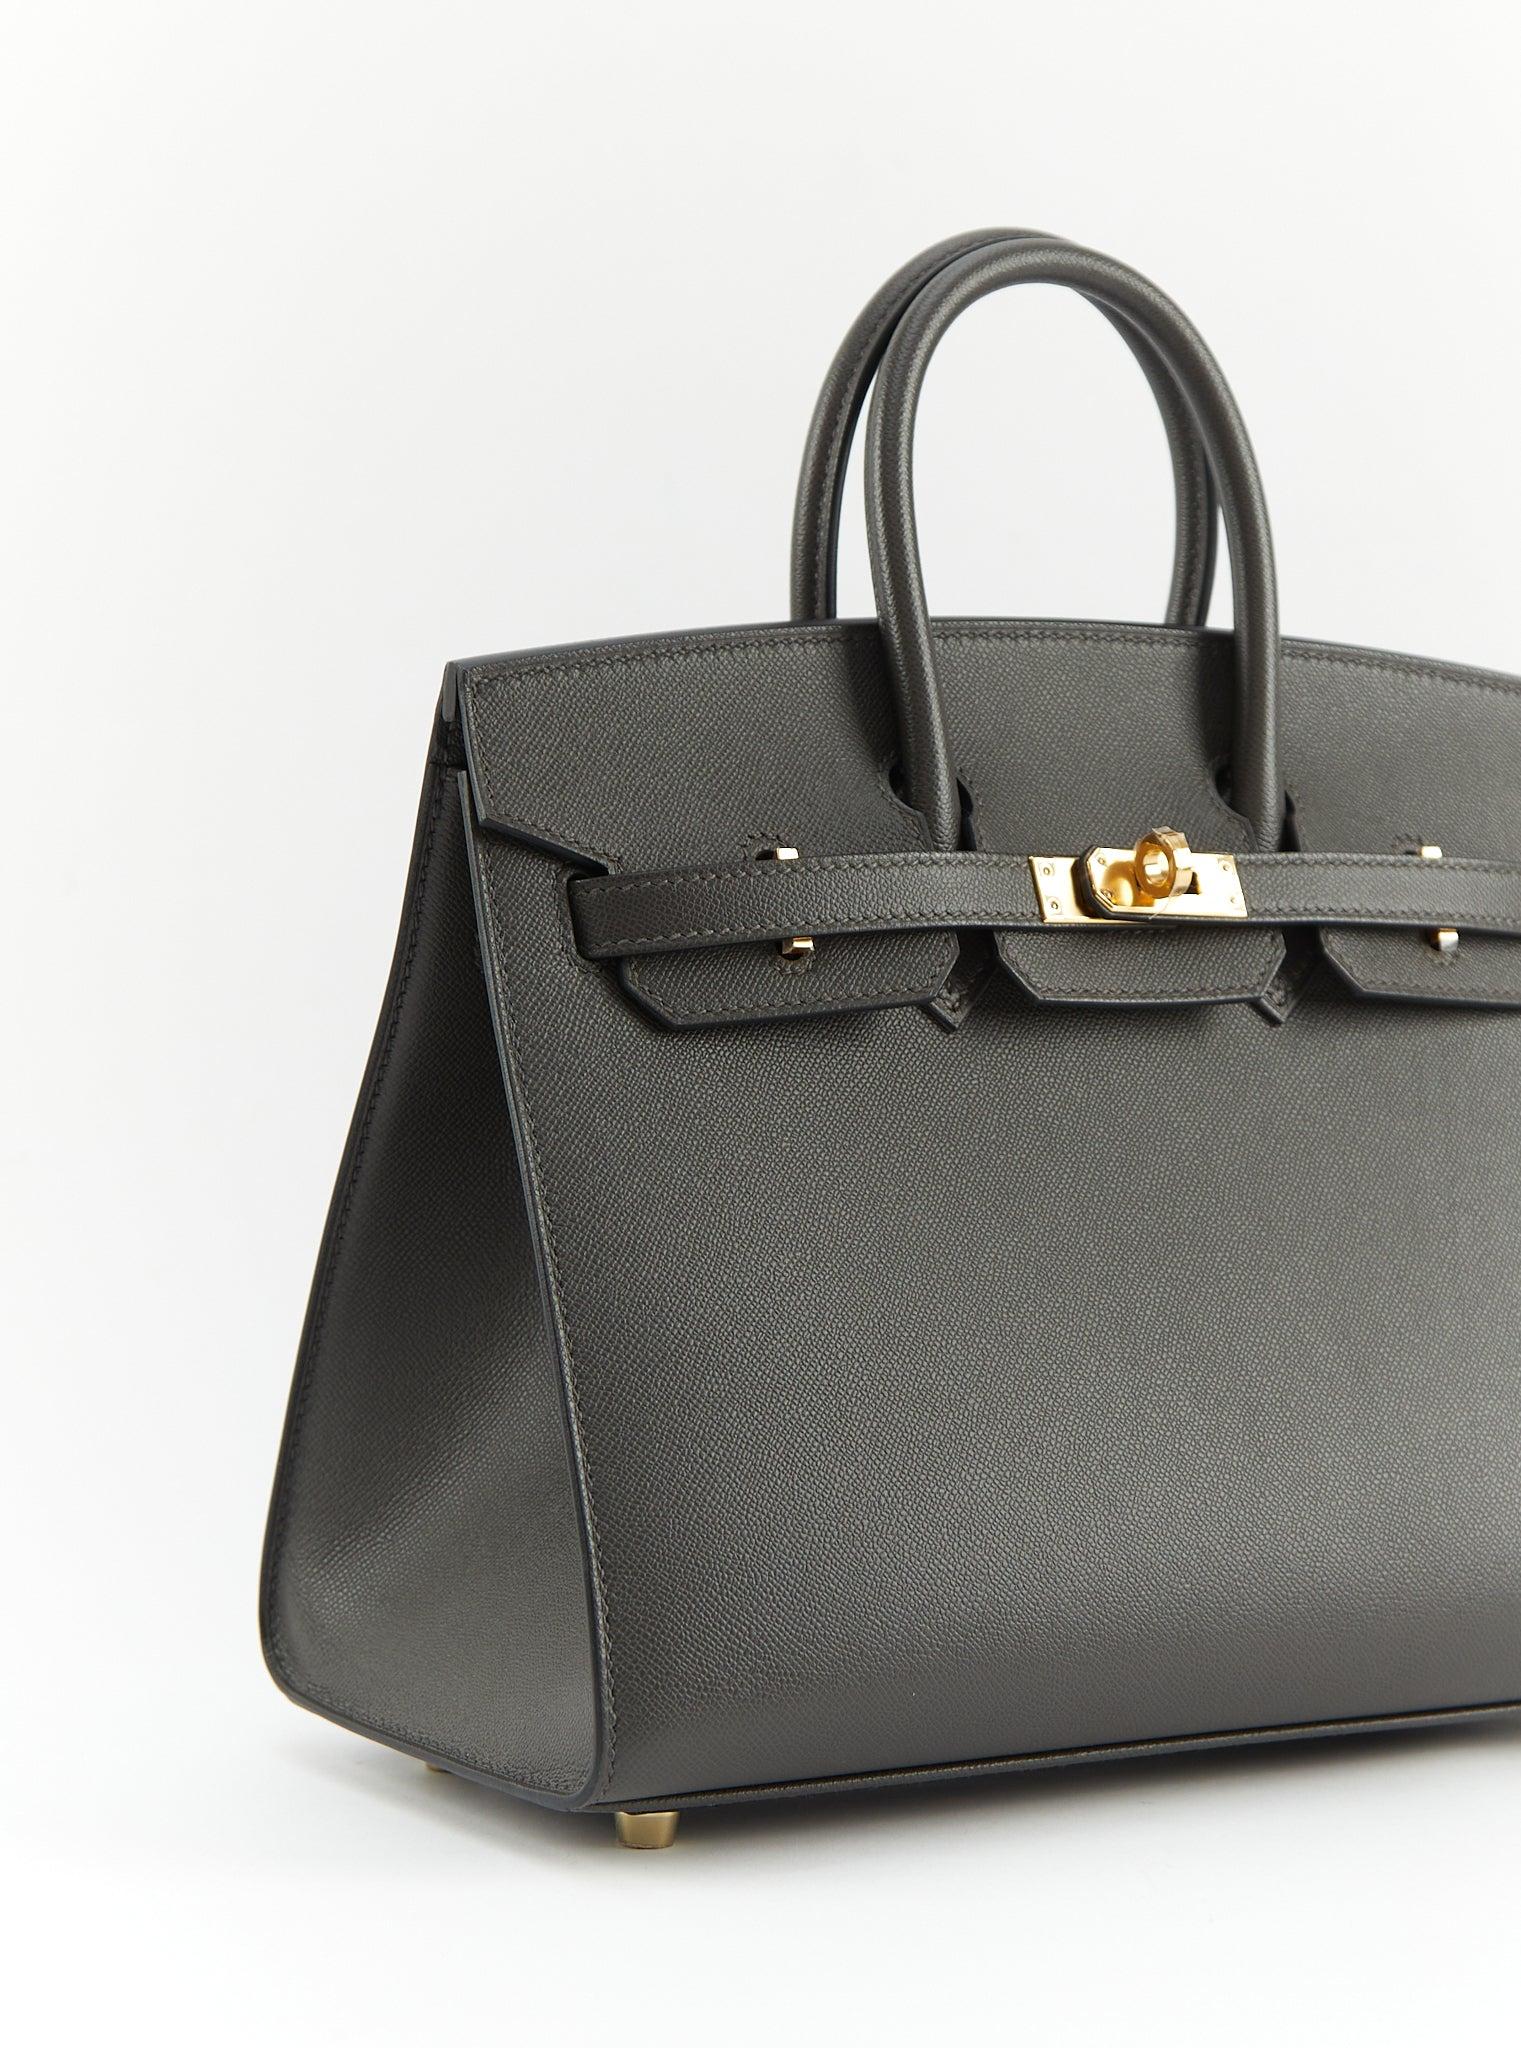 HERMÈS BIRKIN 25CM SELLIER GRAPHITE Madame Leather with Gold Hardware In Excellent Condition For Sale In London, GB